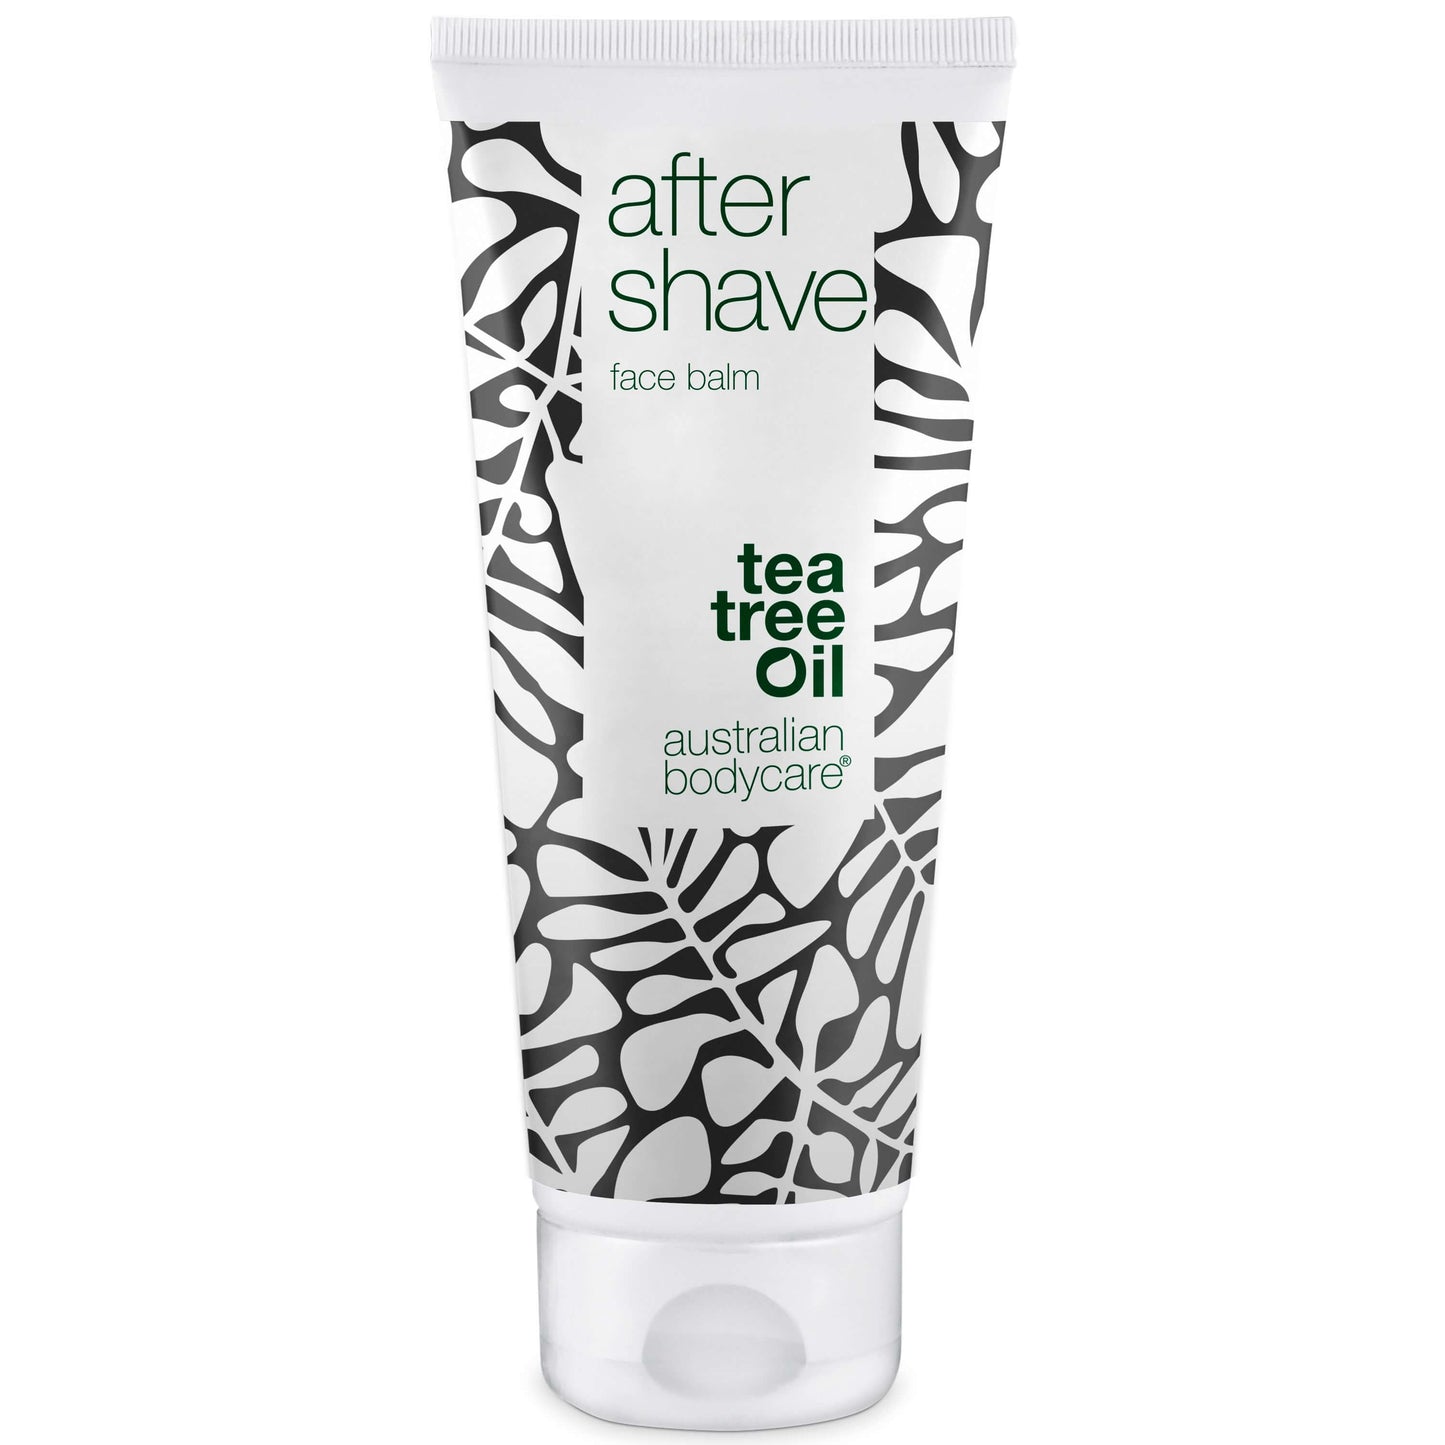 After Shave against razor burn and razor bumps - Aftershave lotion to prevent shaving rash and ingrown hair